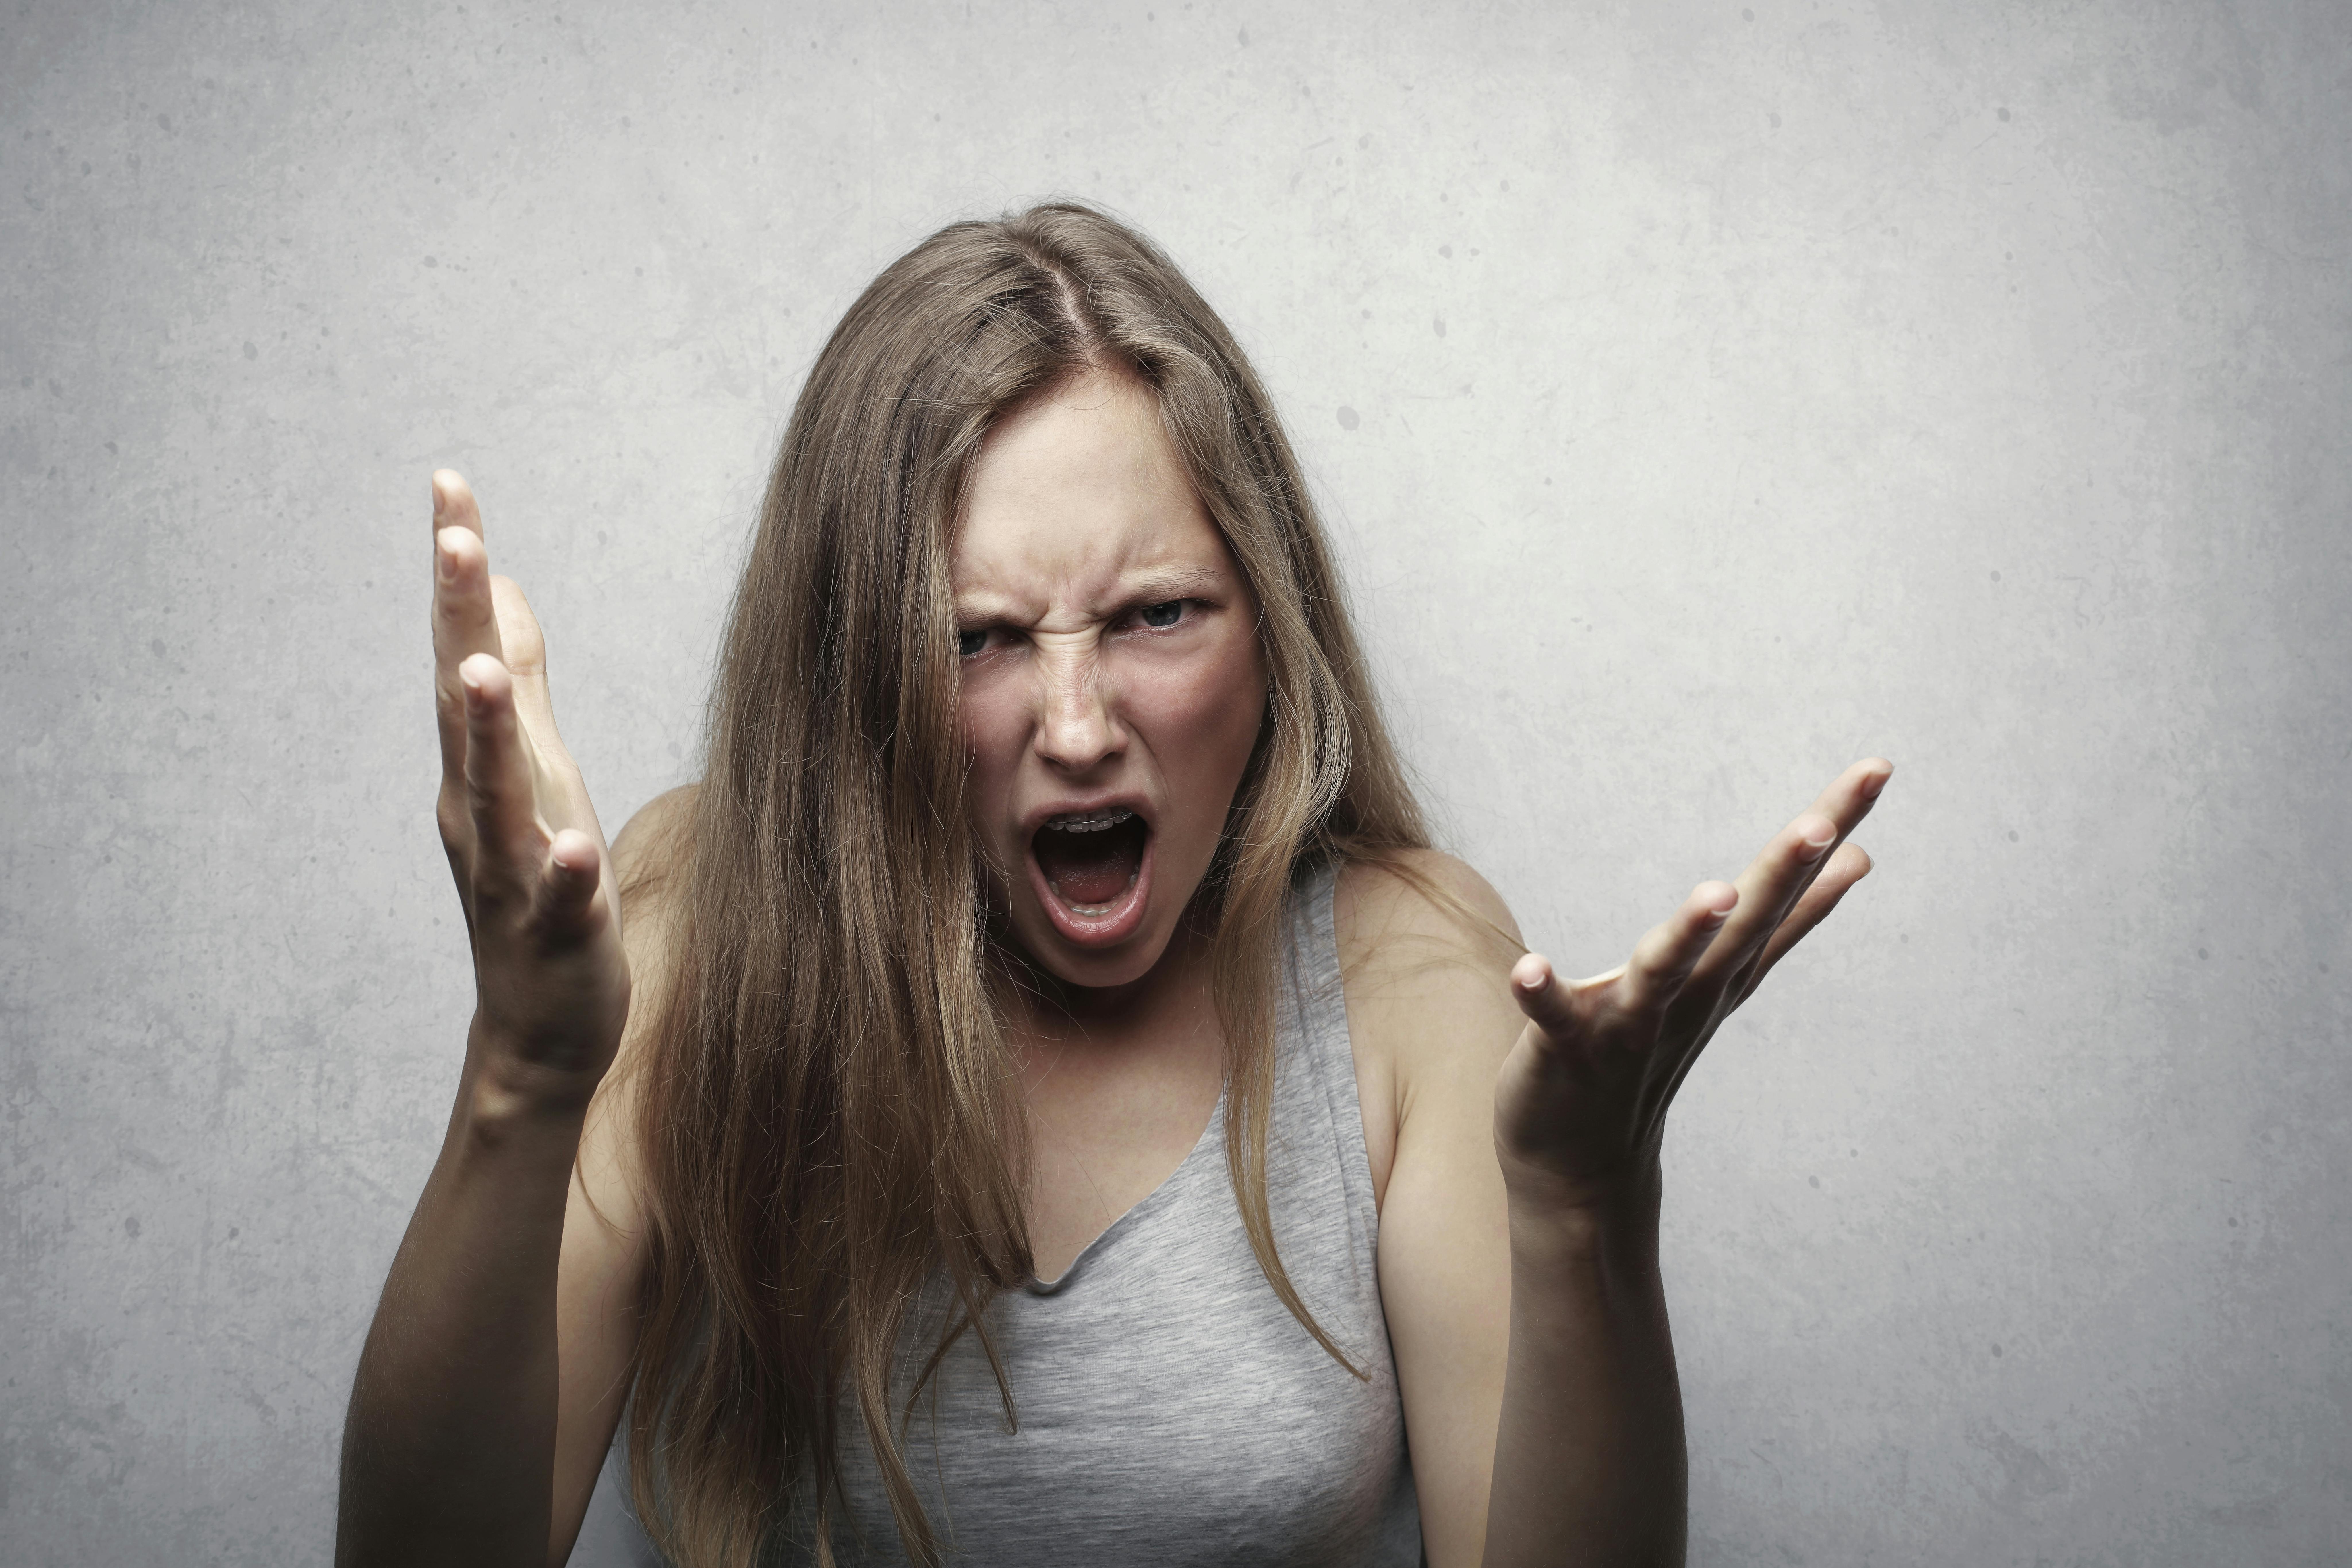 An angry woman yelling | Source: Pexels